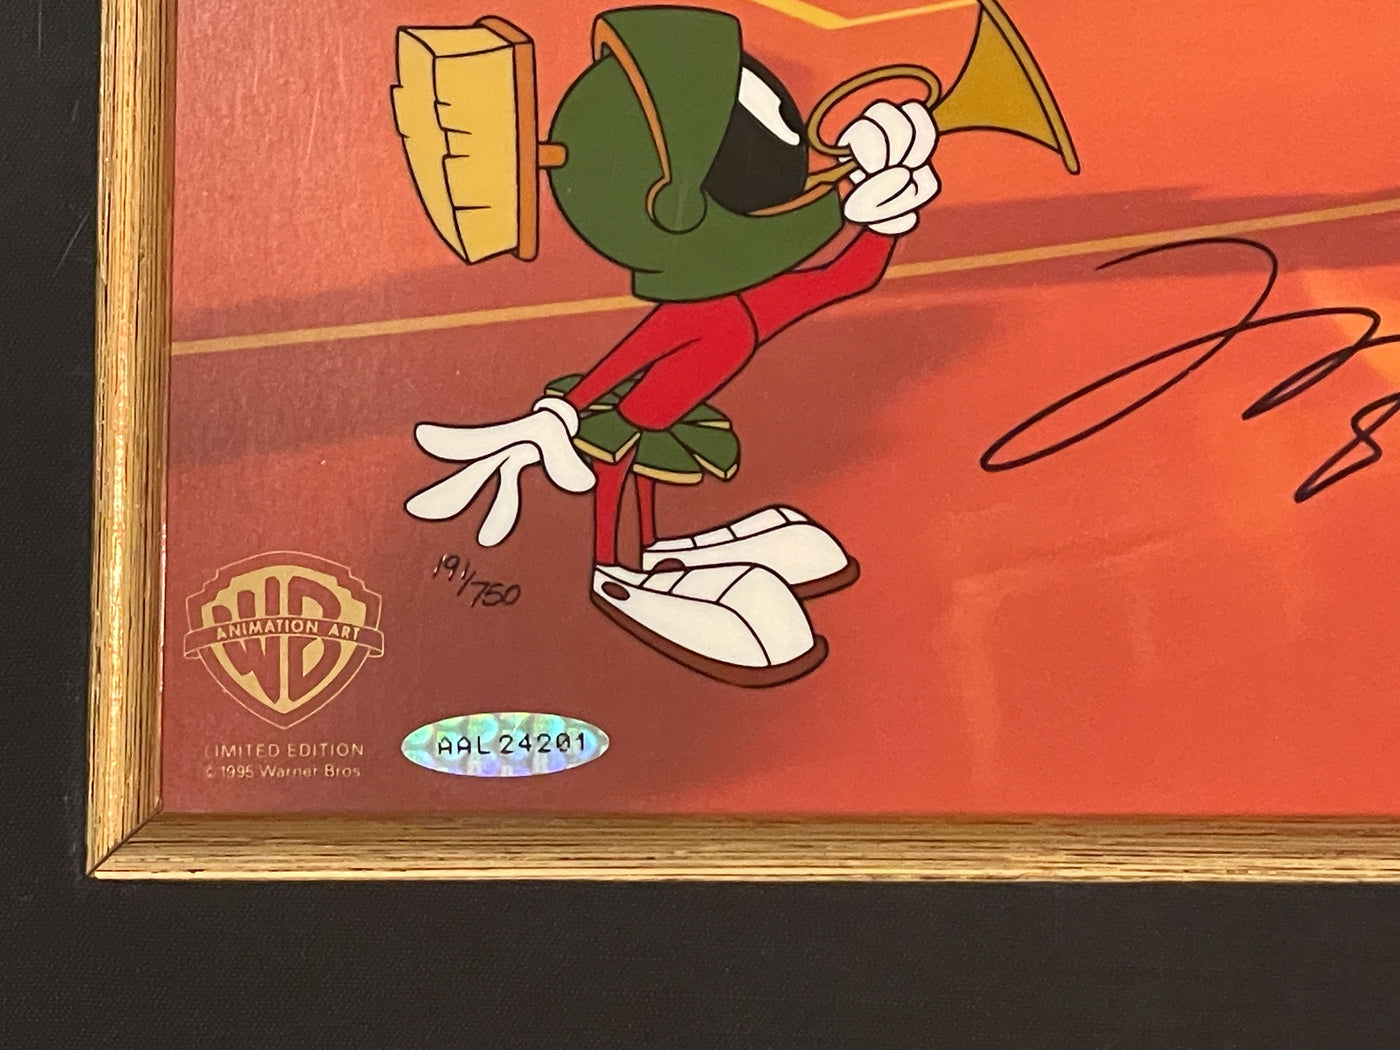 Original Warner Brothers Limited Edition Cel "The Great Space Erase" featuring Bugs Bunny, Marvin Martian, and Michael Jordan